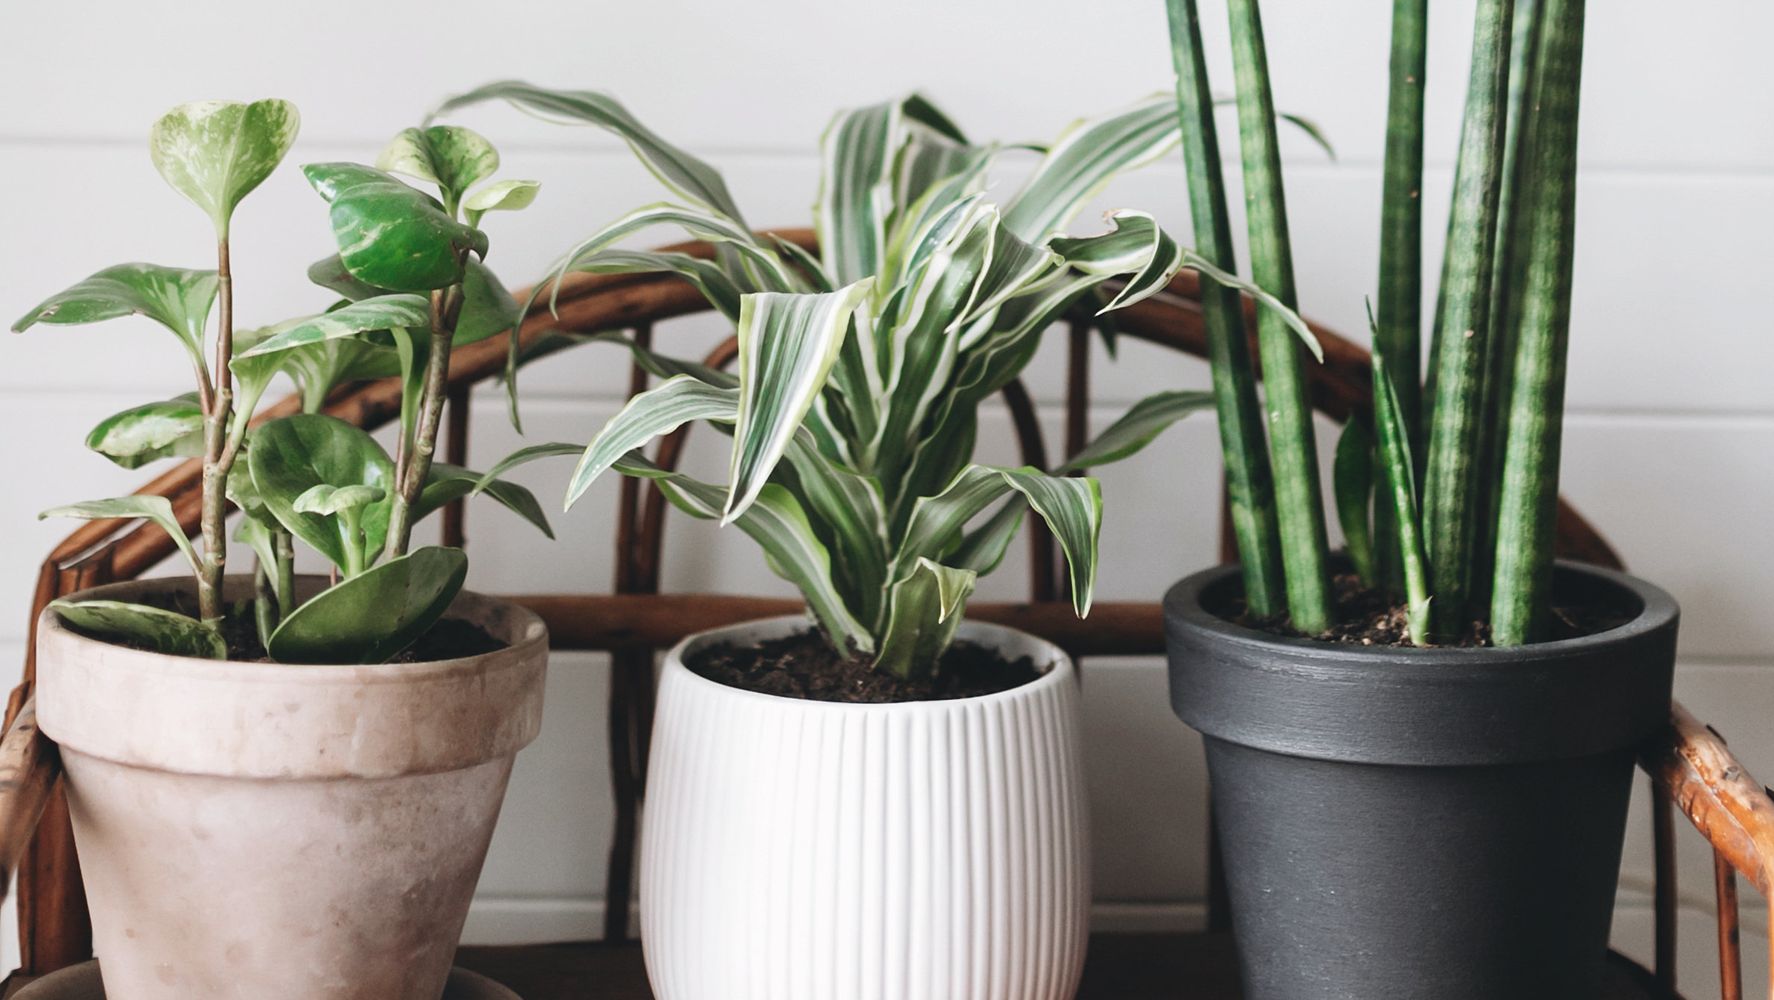 21 Indoor Plants That Help Clean The Air And Remove Toxins ...